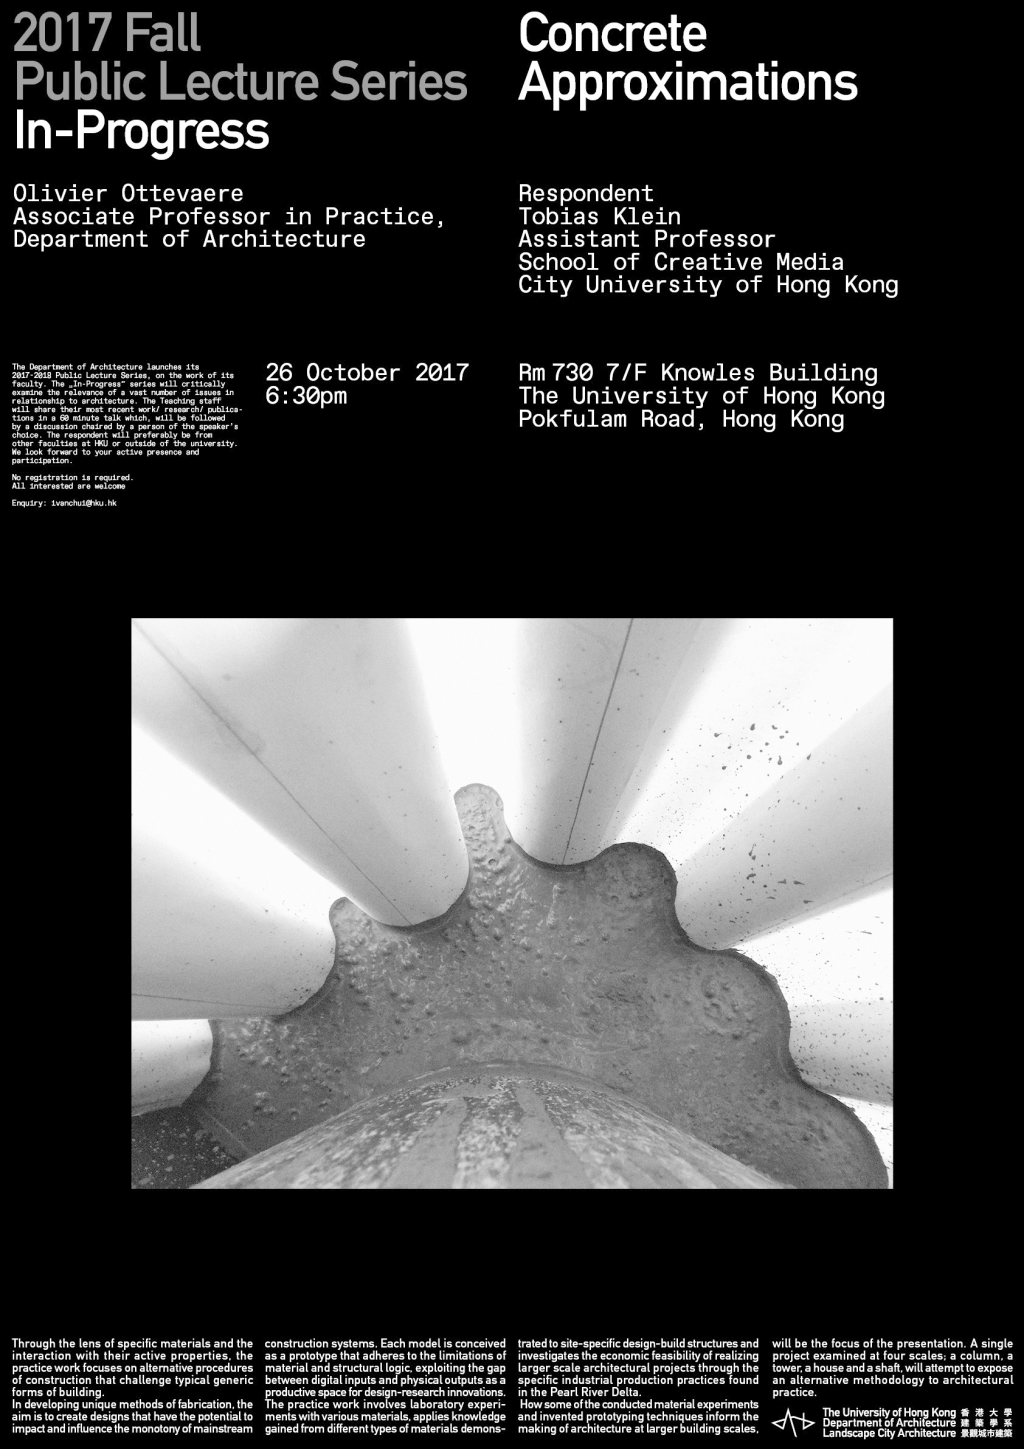  Public Lecture - Concrete Approximations by Olivier Ottevaere, Department of Architecture 